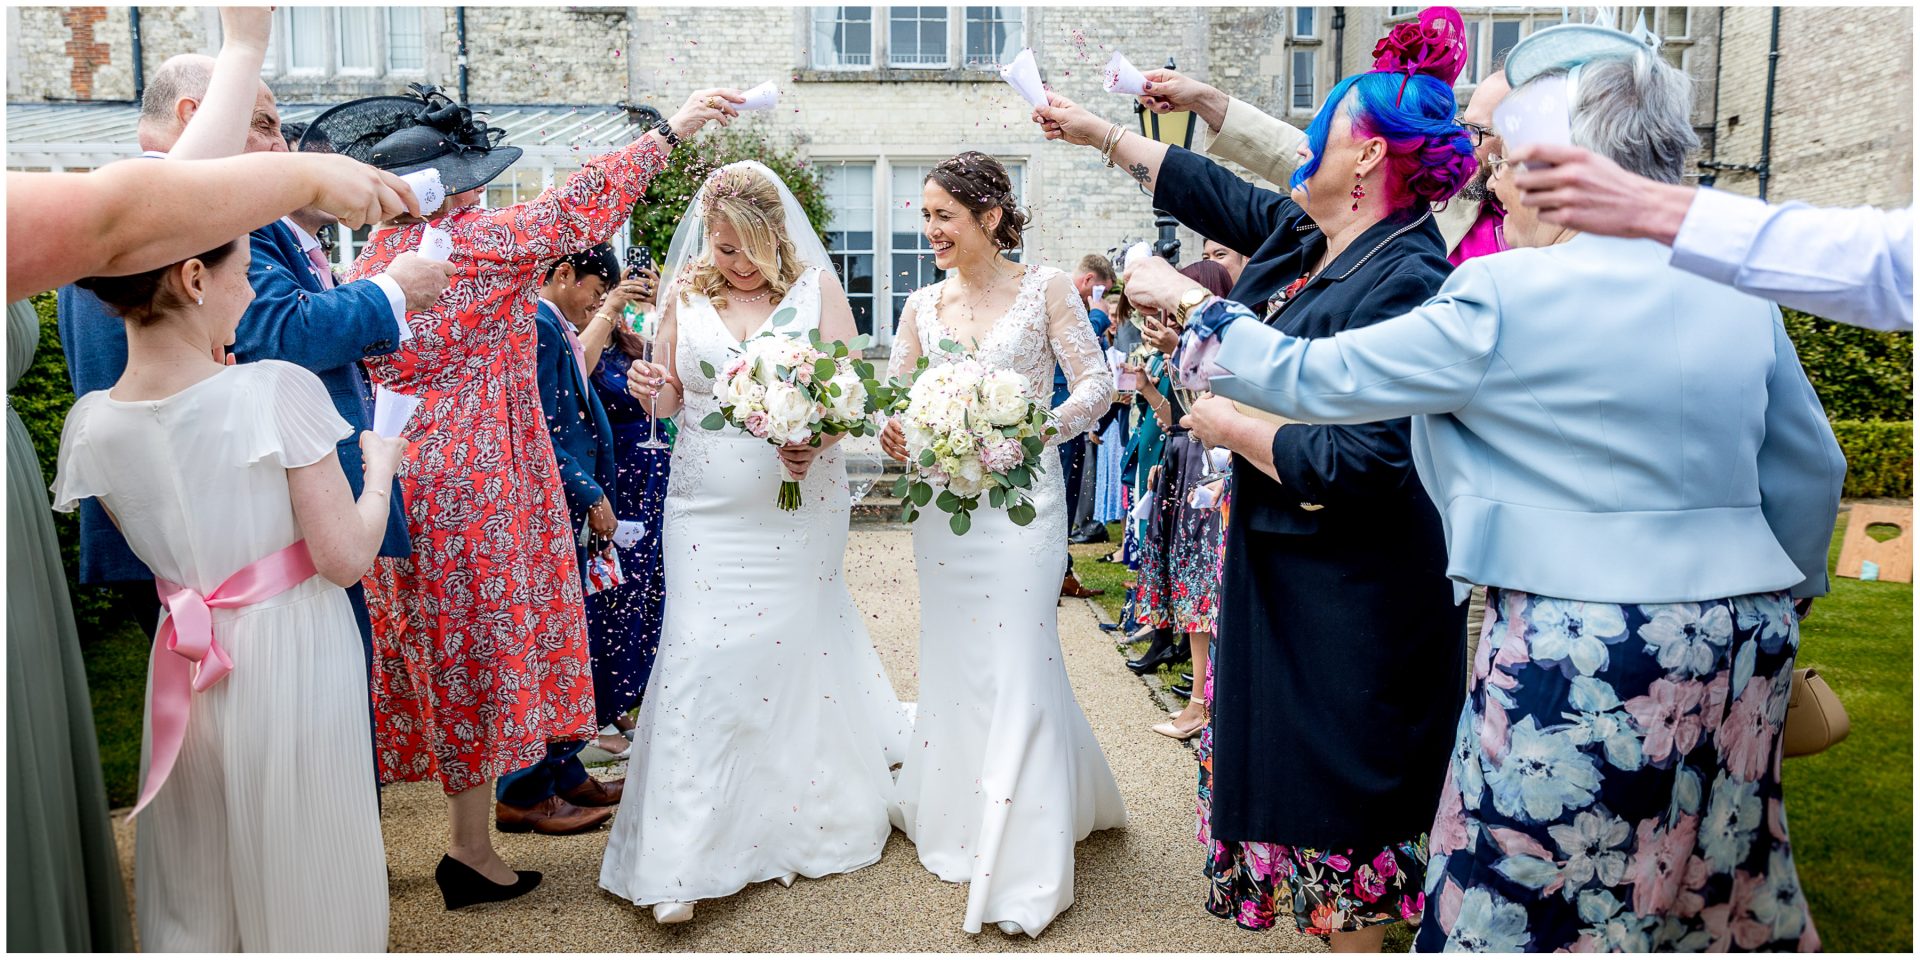 Wedding guests greet the couple with confetti